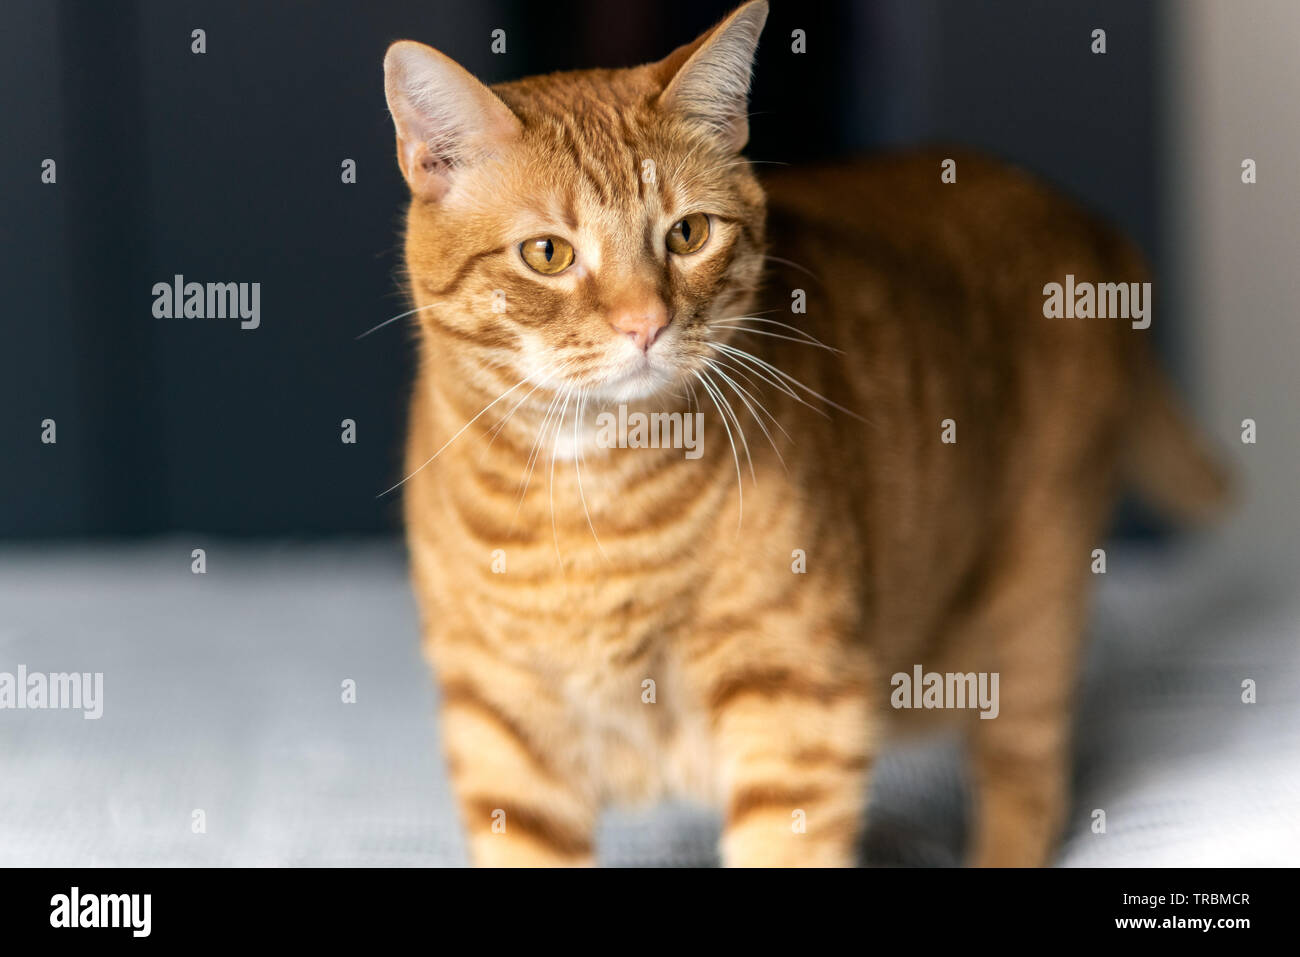 Adorable striped Tabby cat with eye fixated on object of interest inside home. Stock Photo